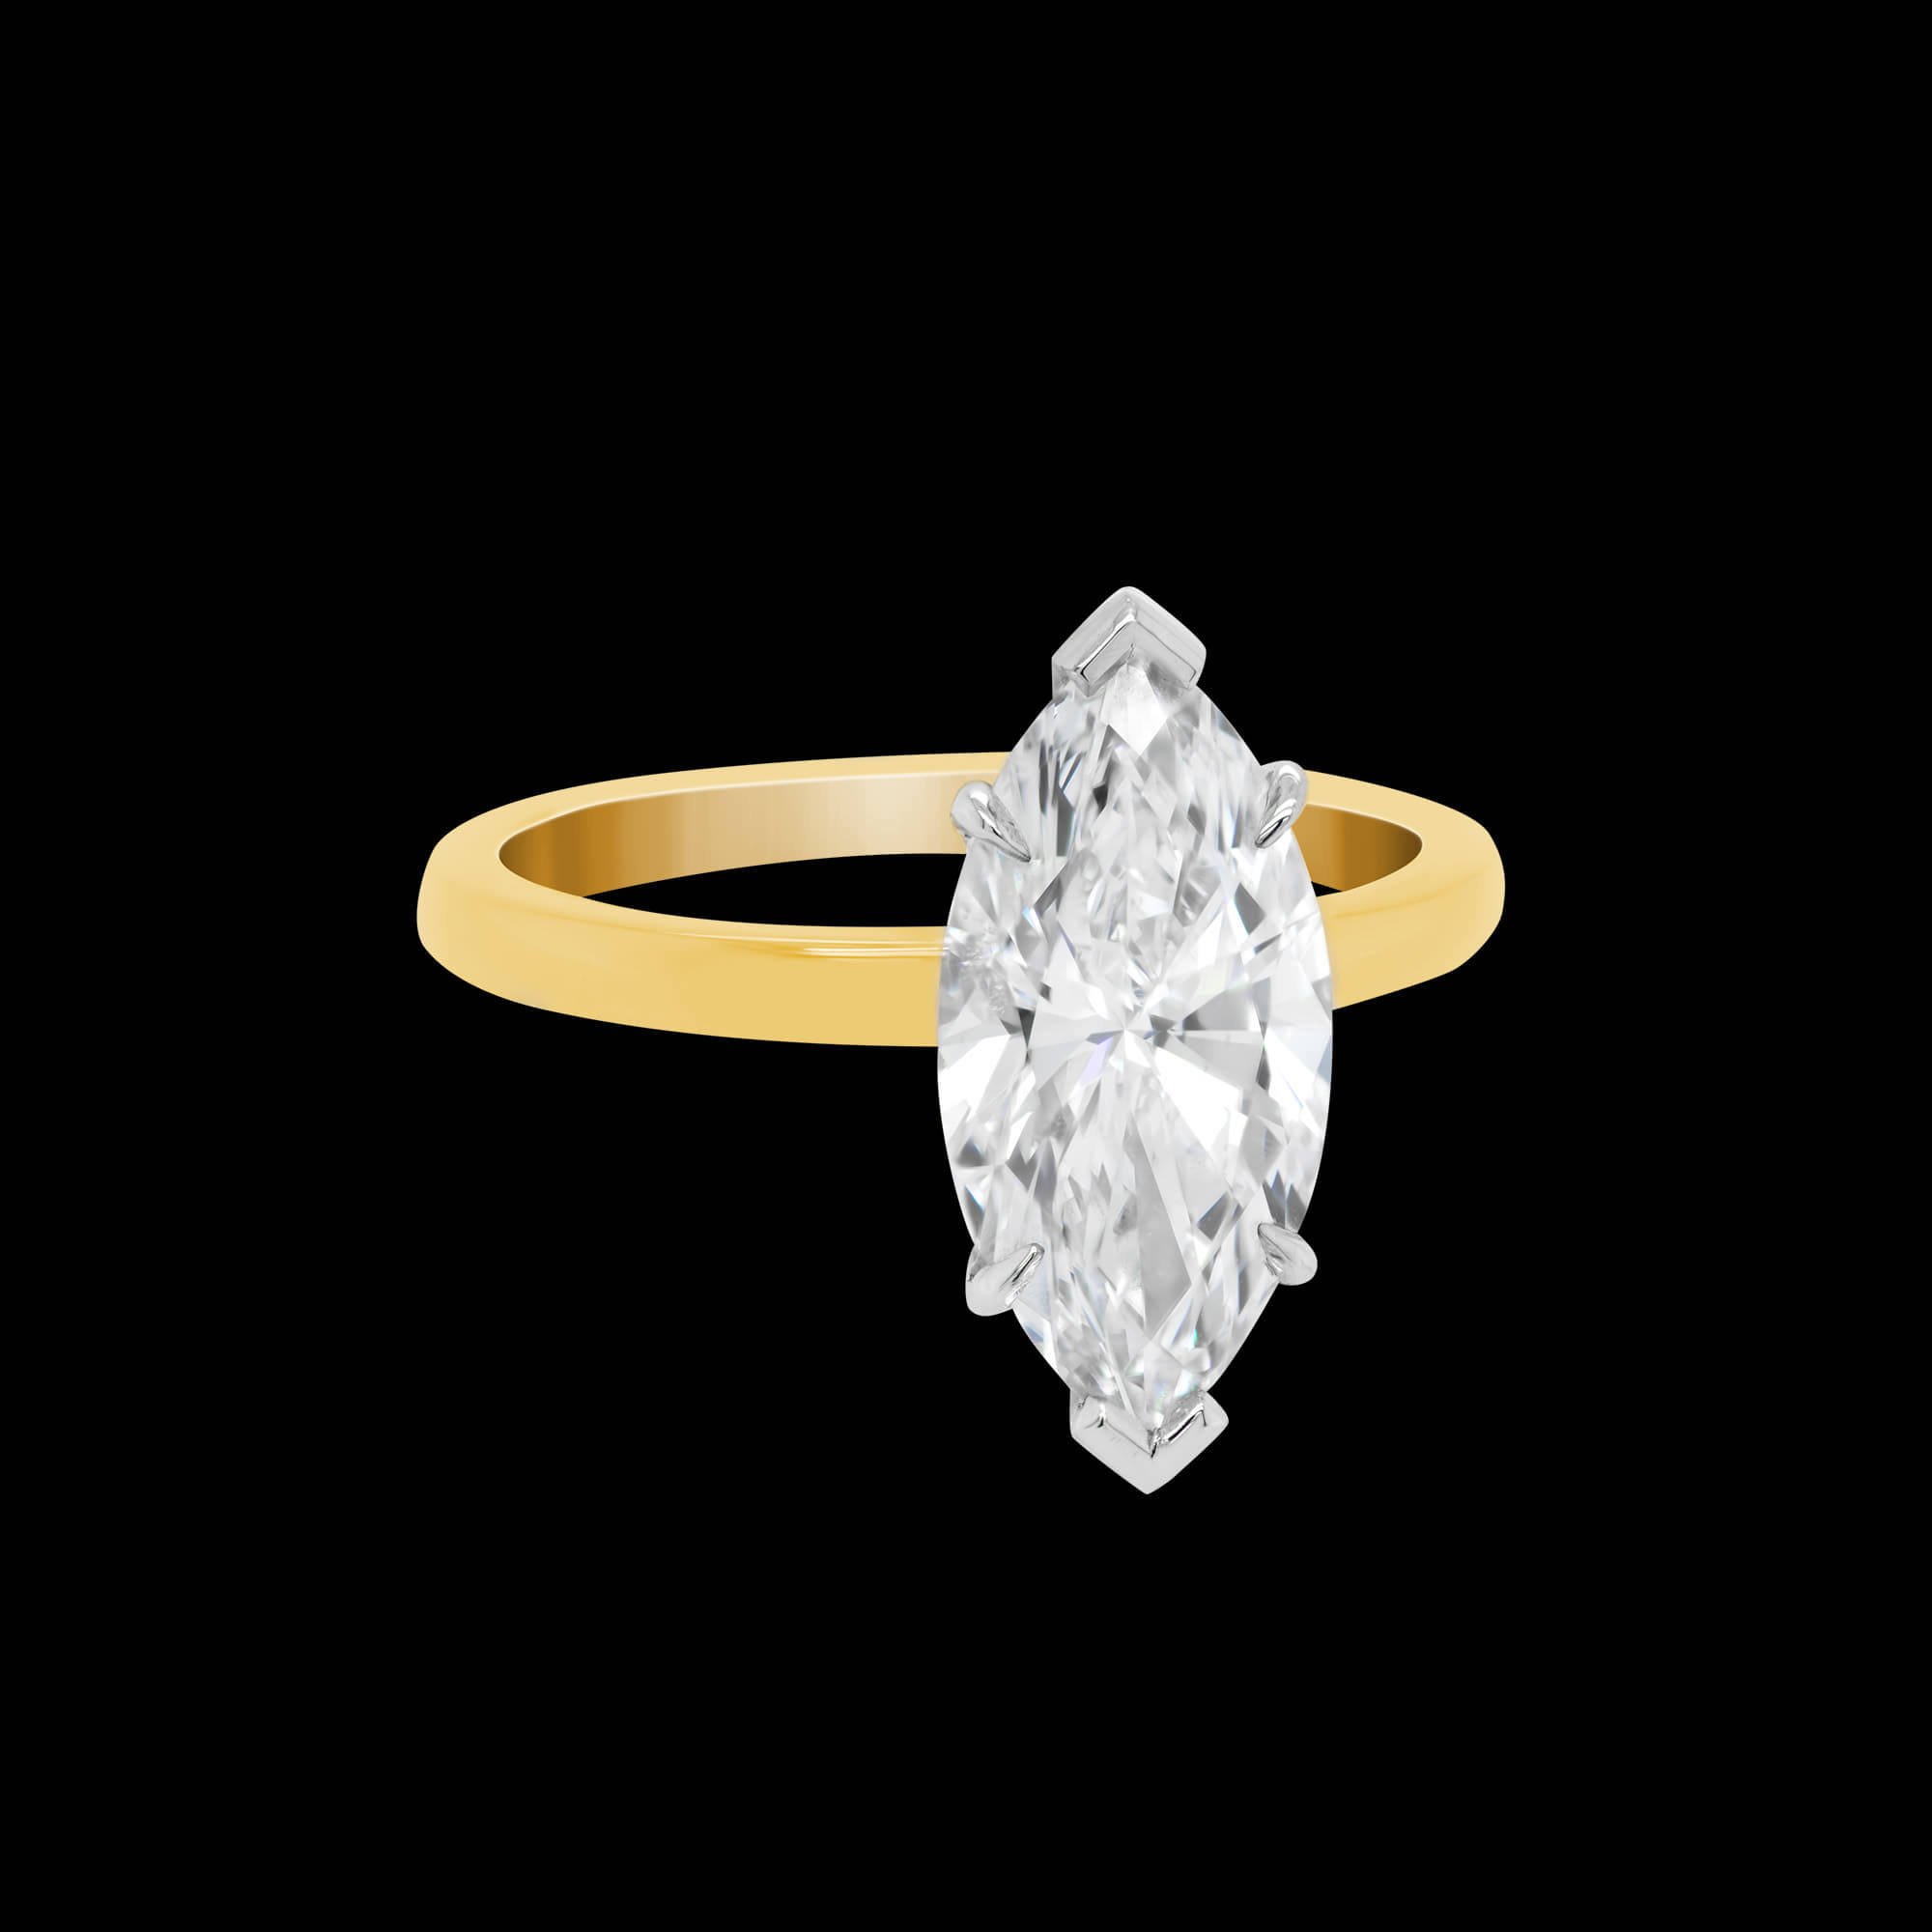 Custom 18kt yellow gold solitaire engagement ring with a marquise diamond | Classic Engagement. FRIDA | Fine Jewellery.jpg